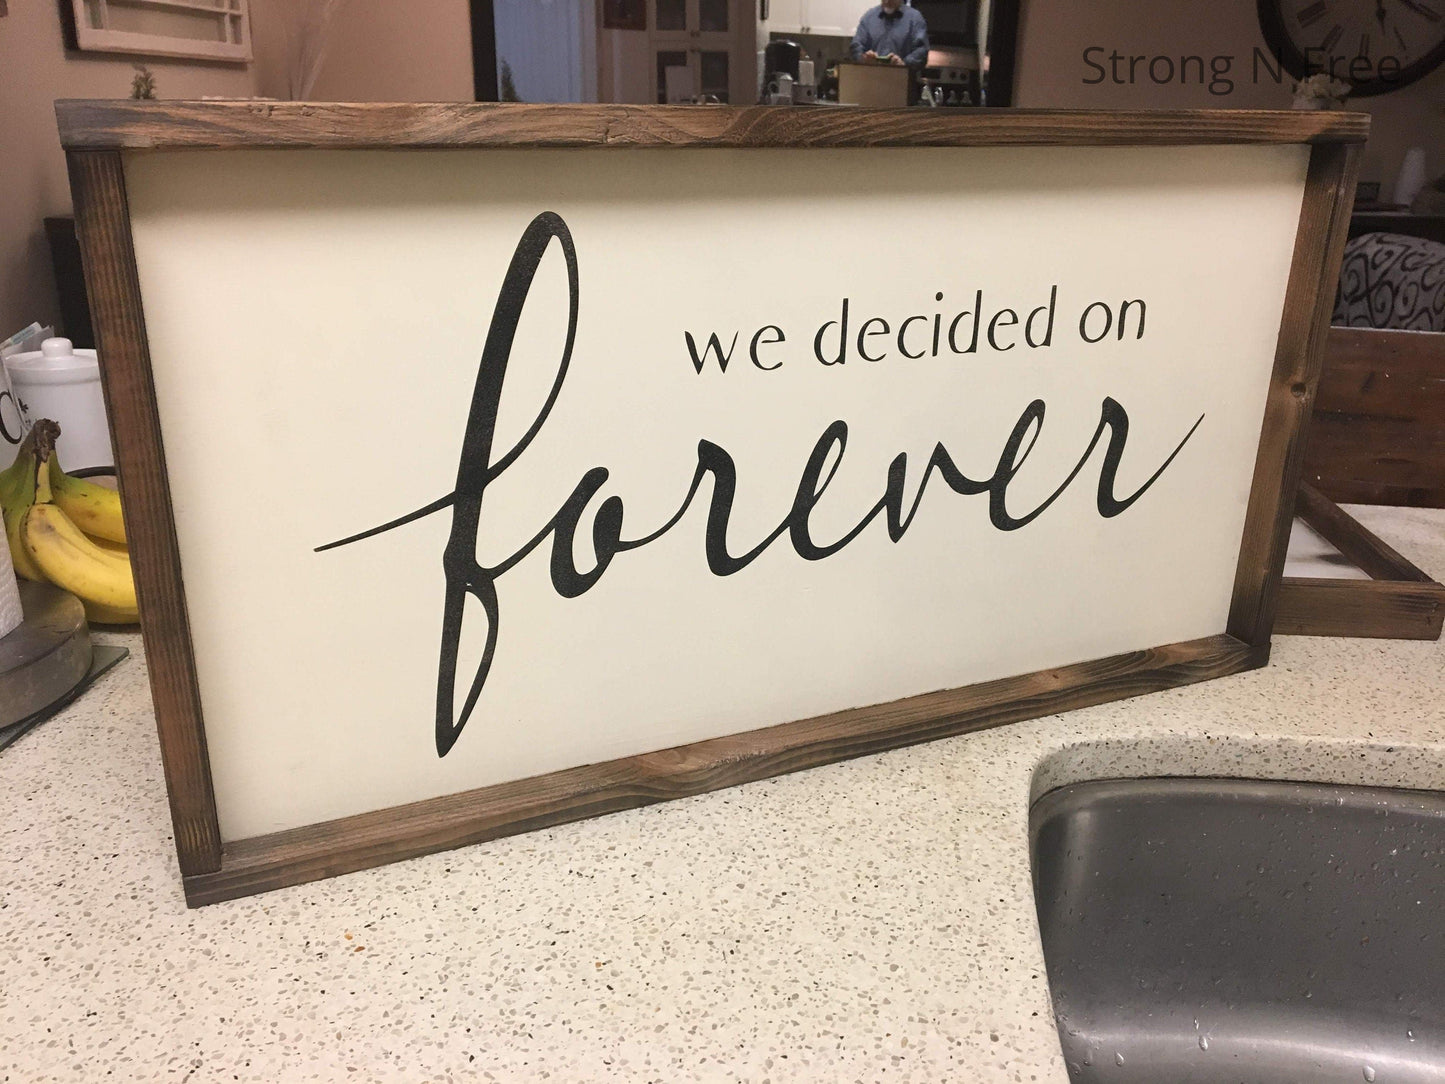 We decided on forever rustic wood with wood frame sign farmstyle anniversary engagement and wedding gift name sign